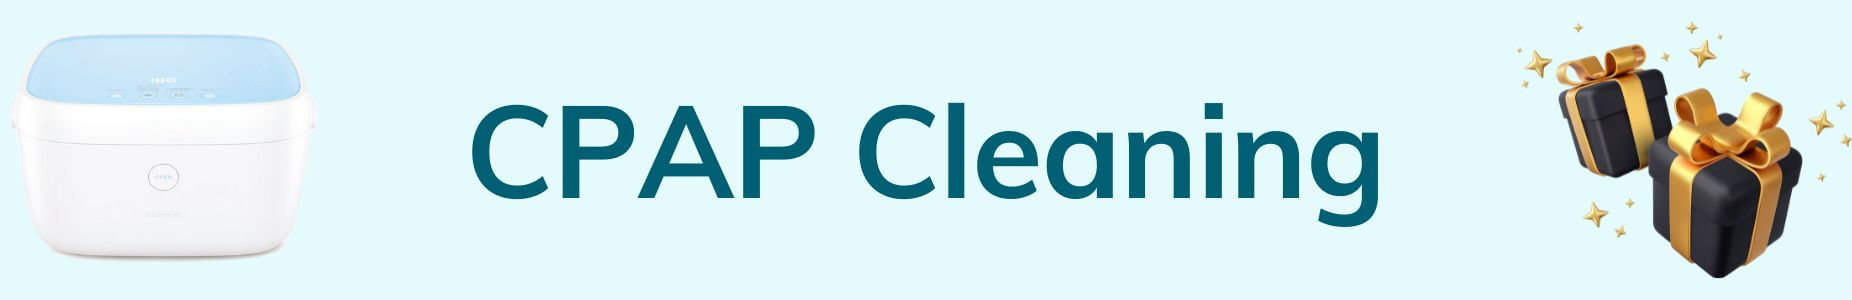 Shop CPAP Cleaning Supplies